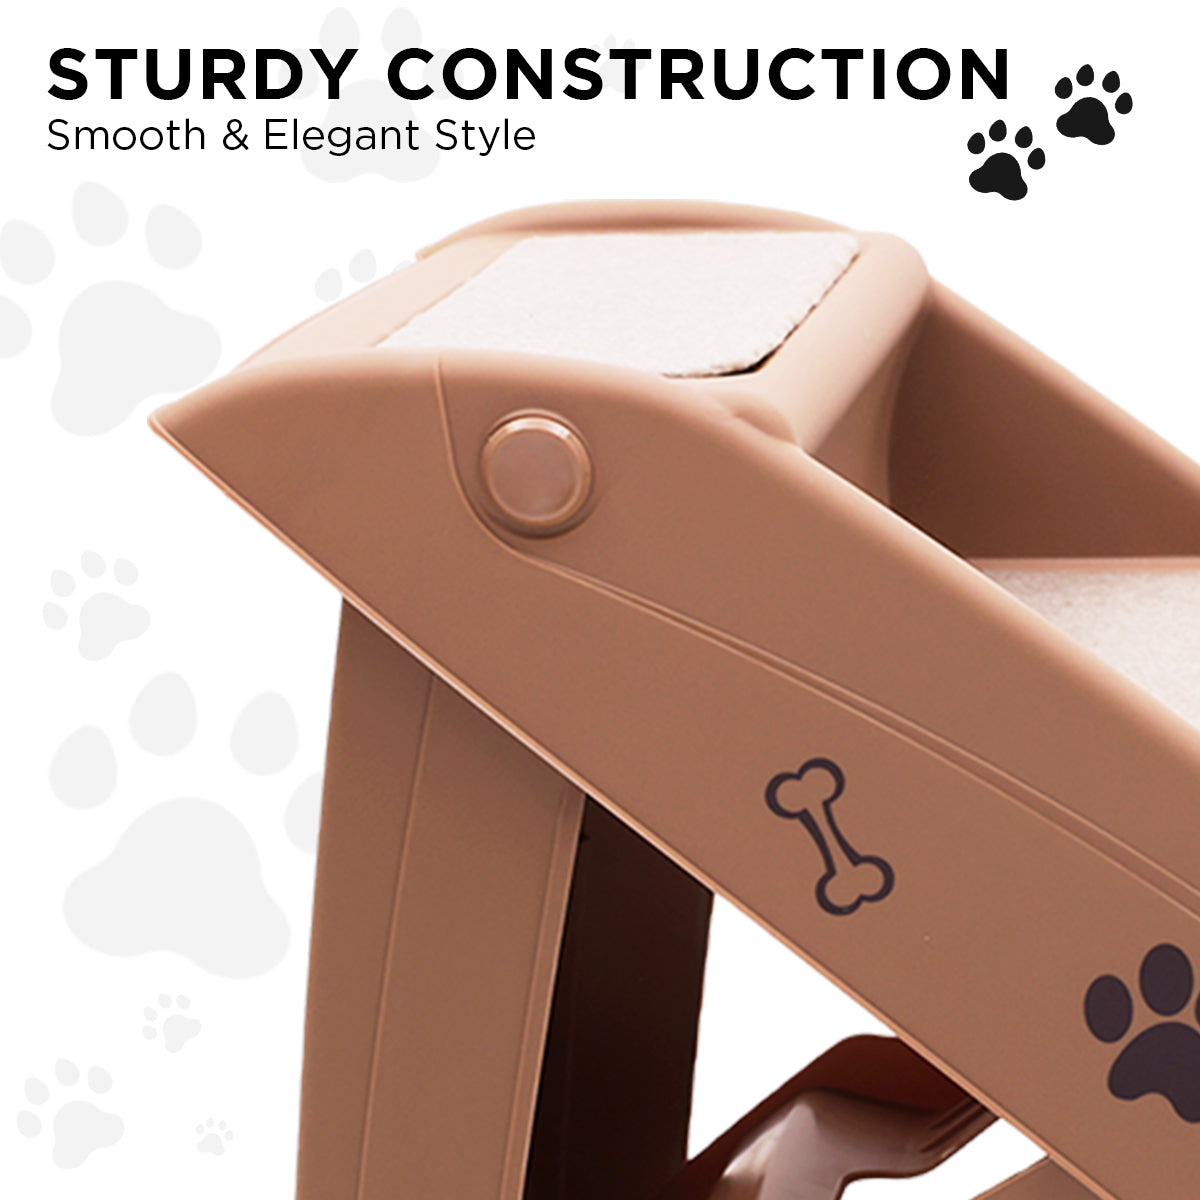 Furtastic 50cm Foldable Step Ladder Stairs - Brown Petsby | Pet Essentials